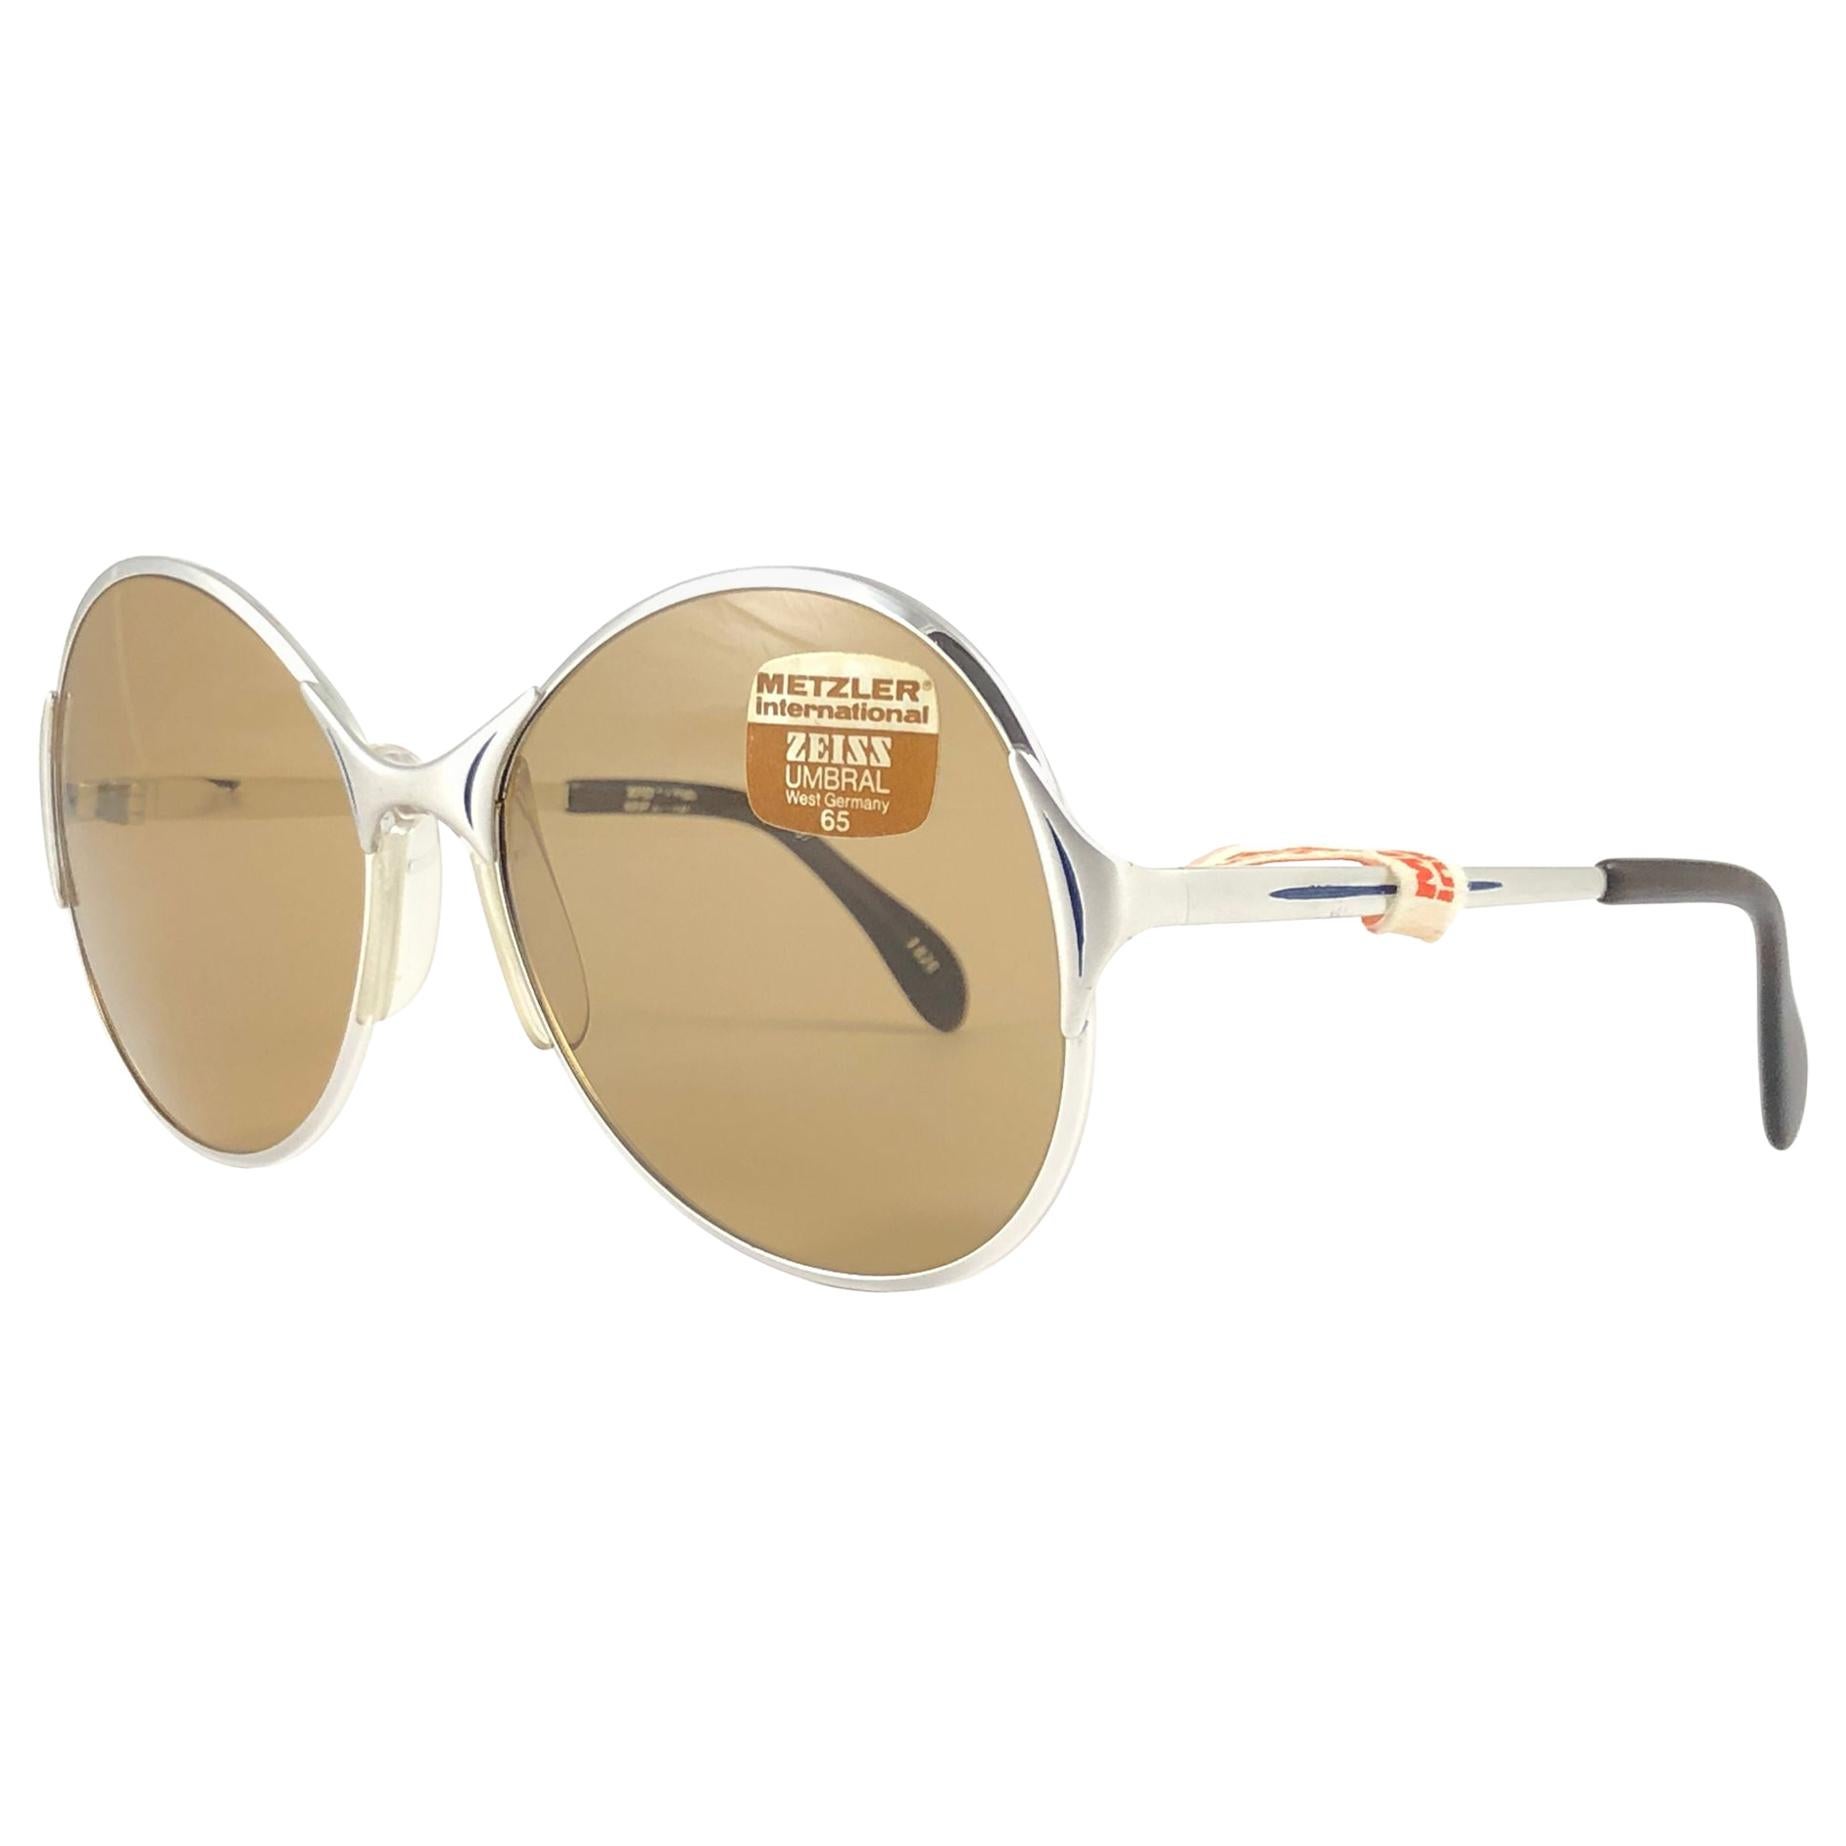 New Vintage Metzler Zeiss Umbramatic 65 Butterfly Sunglasses Made Germany 1980's For Sale